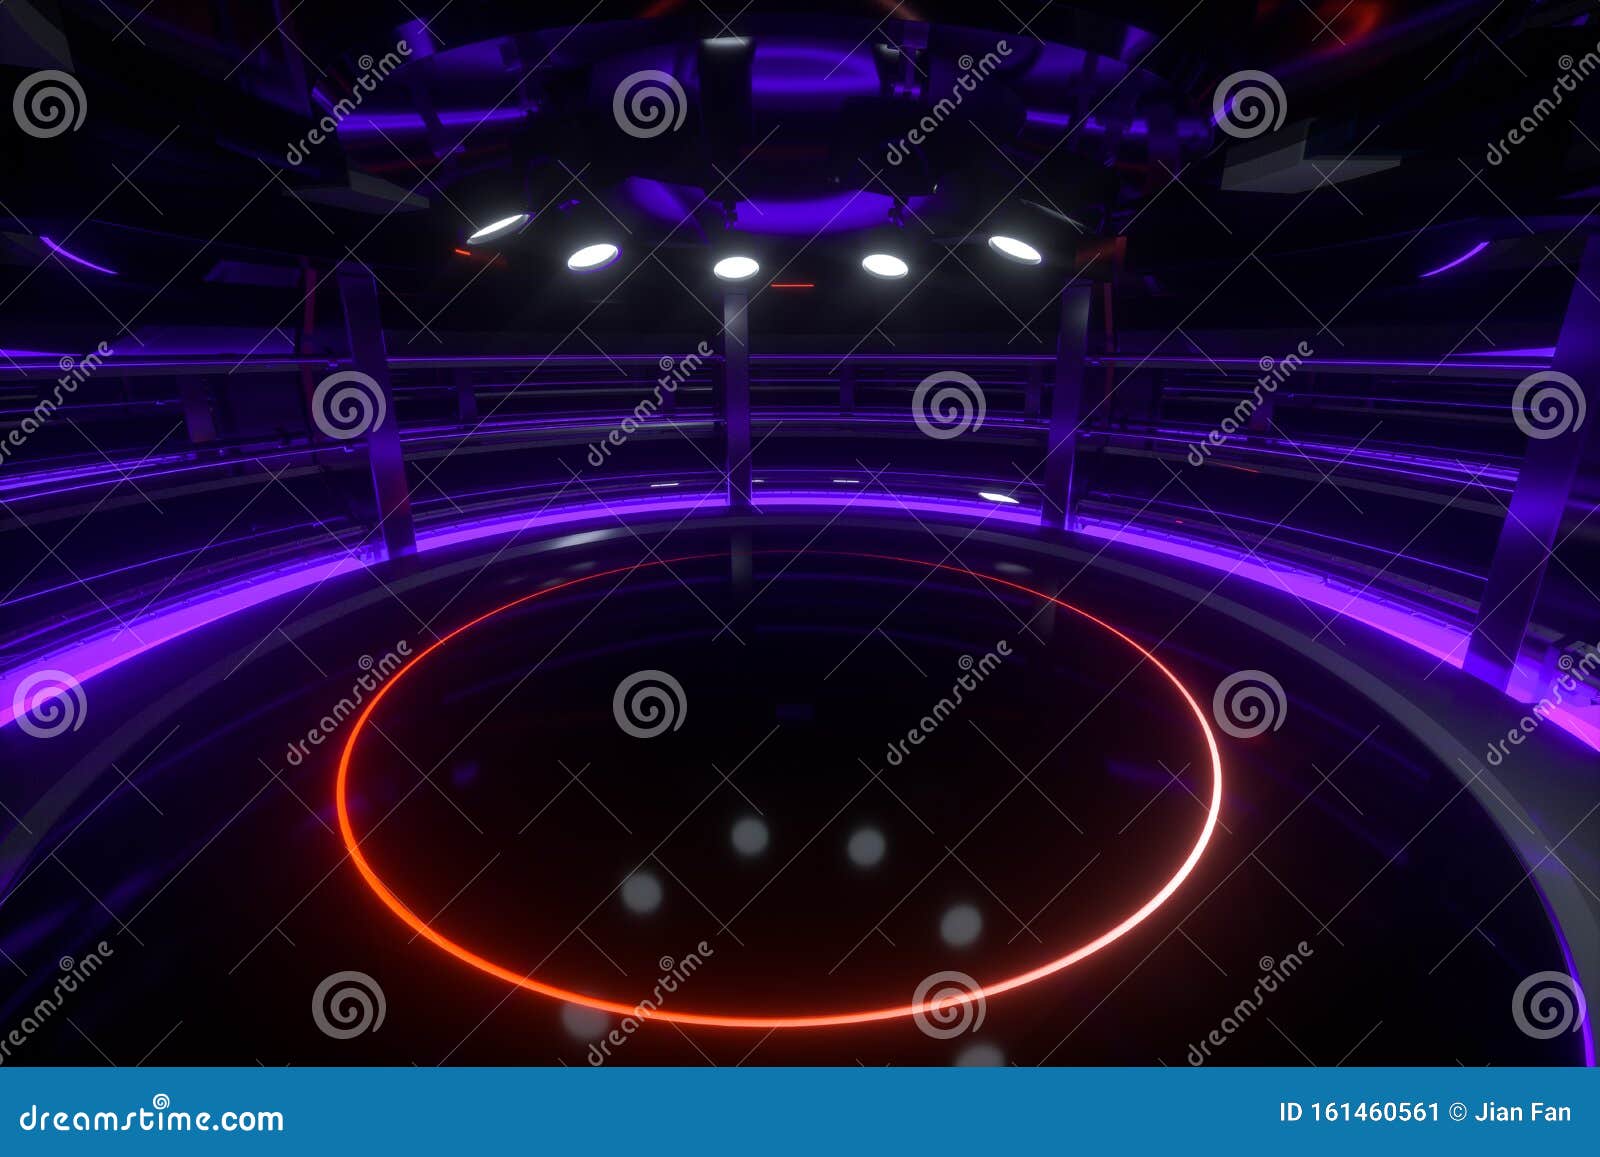 Circular Technological Structure Building, 3d Rendering Stock ...